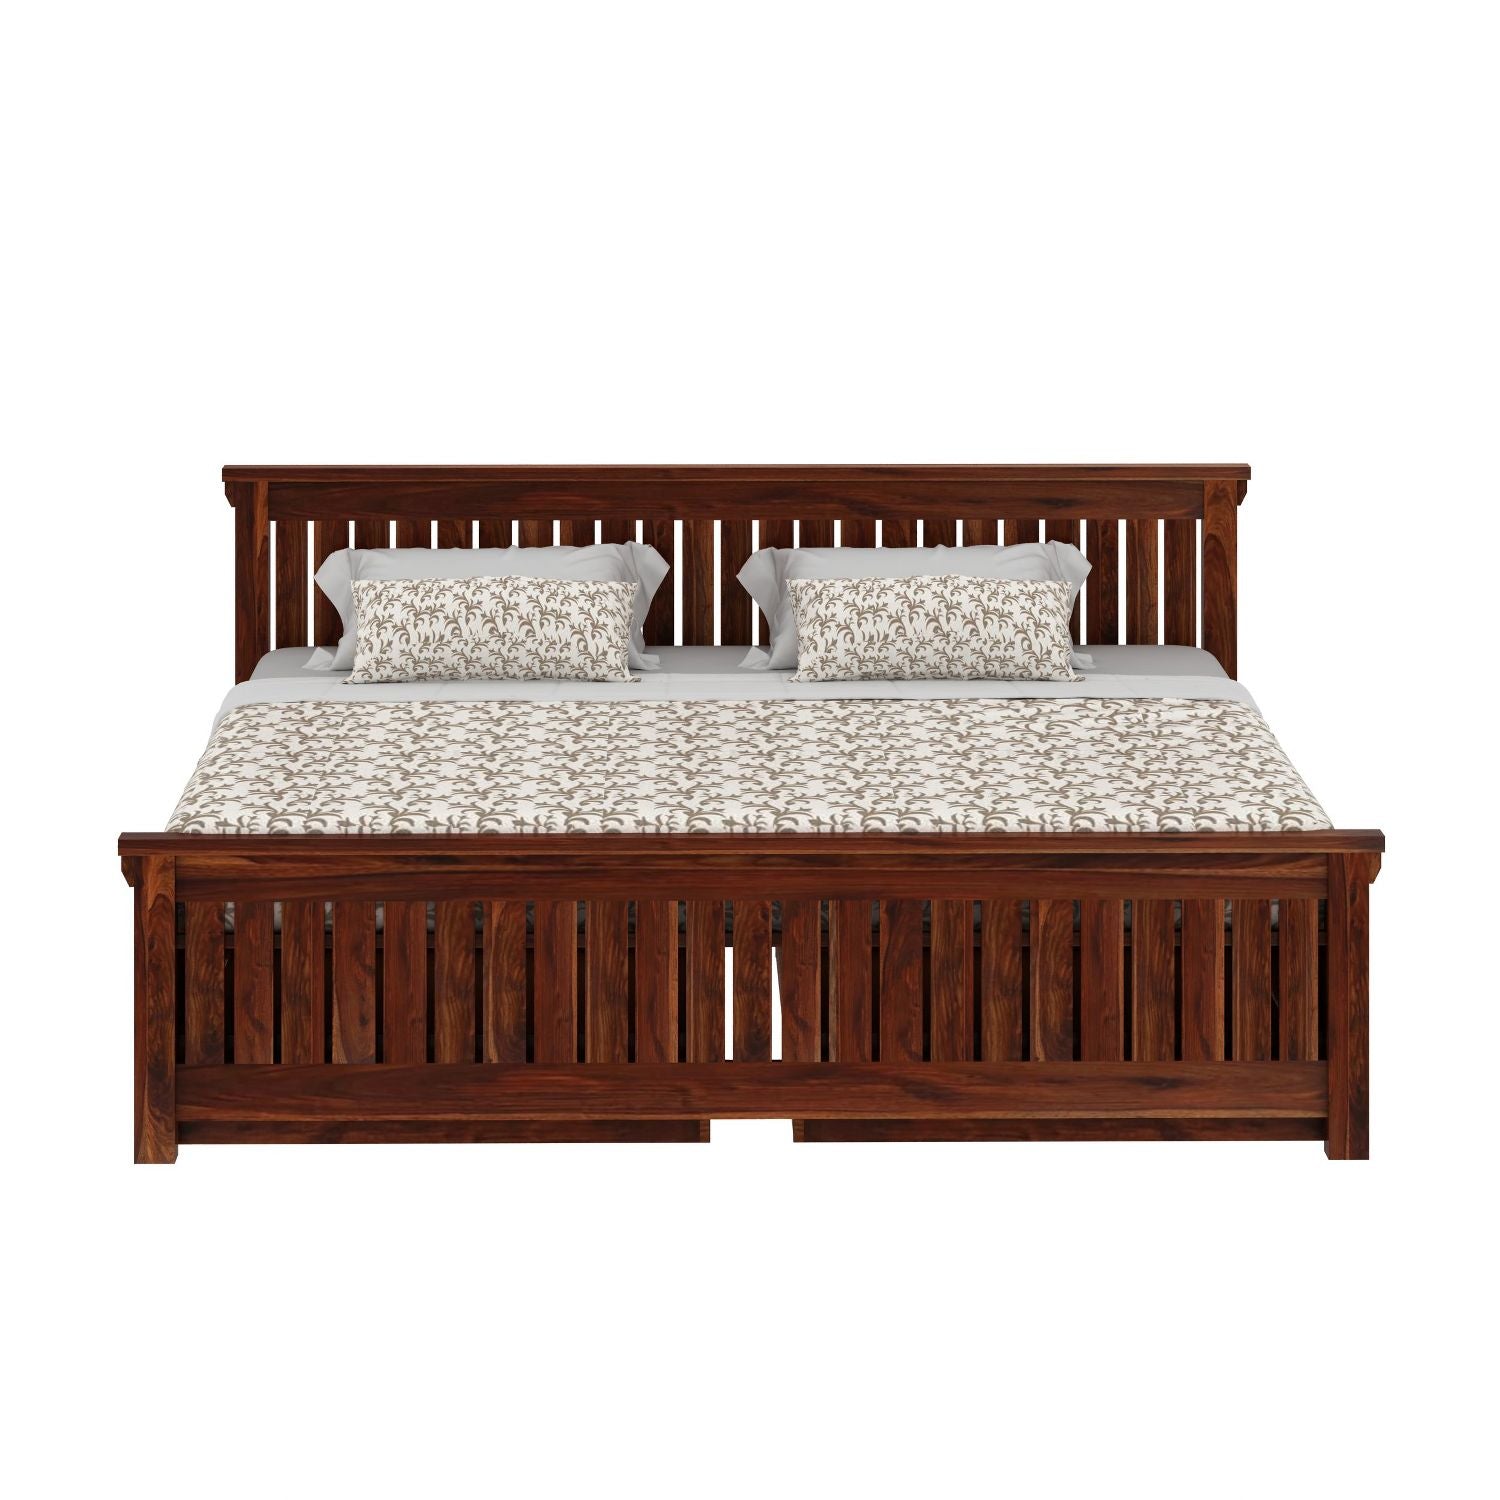 Trinity Solid Sheesham Wood Bed With Two Drawers (King Size, Natural Finish)